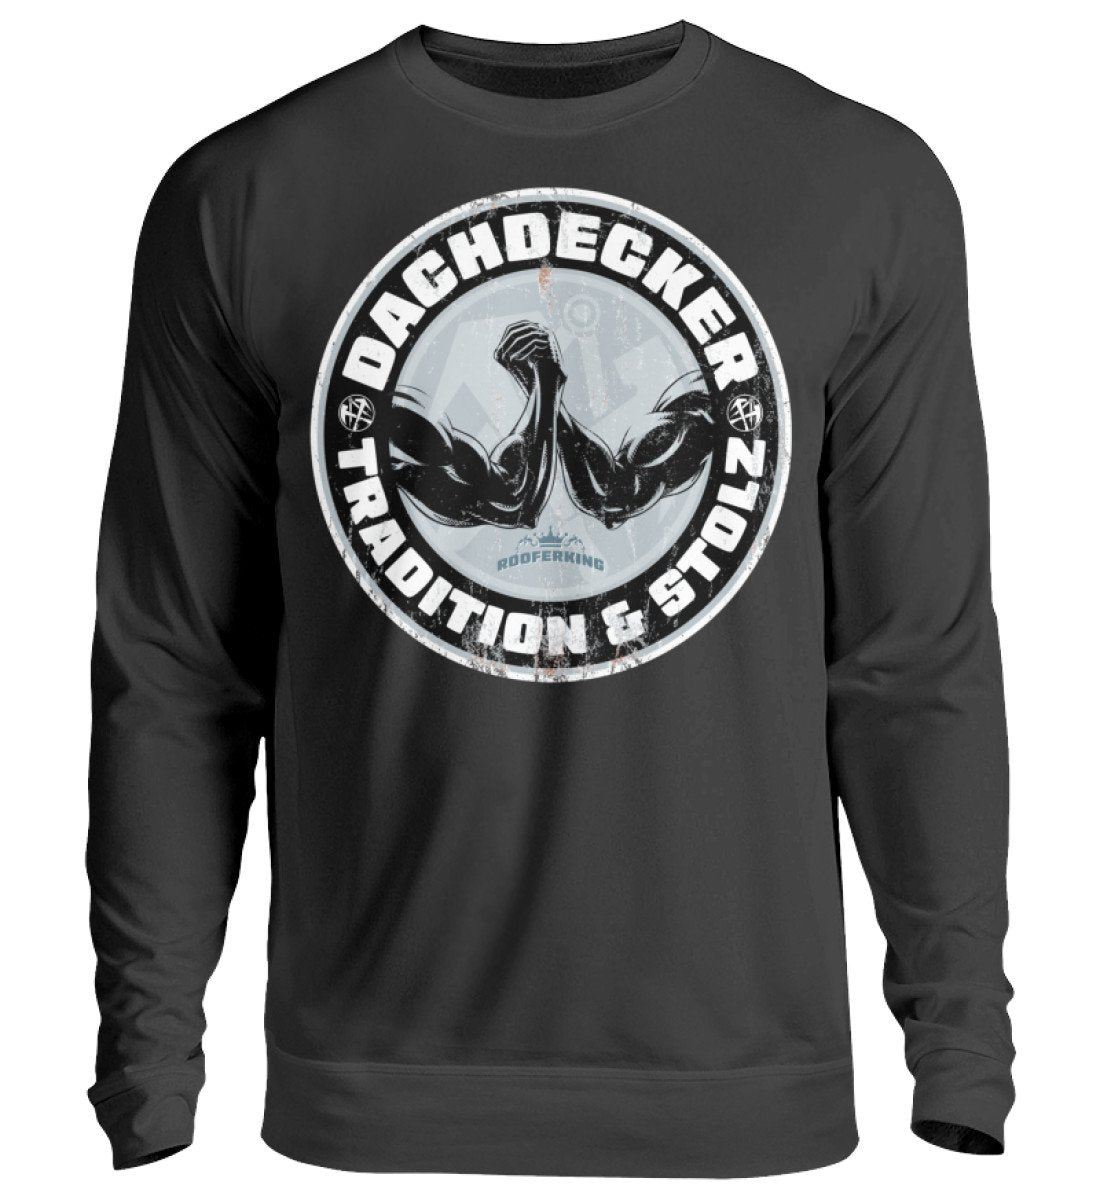 Tradition &amp; pride - roofer sweater